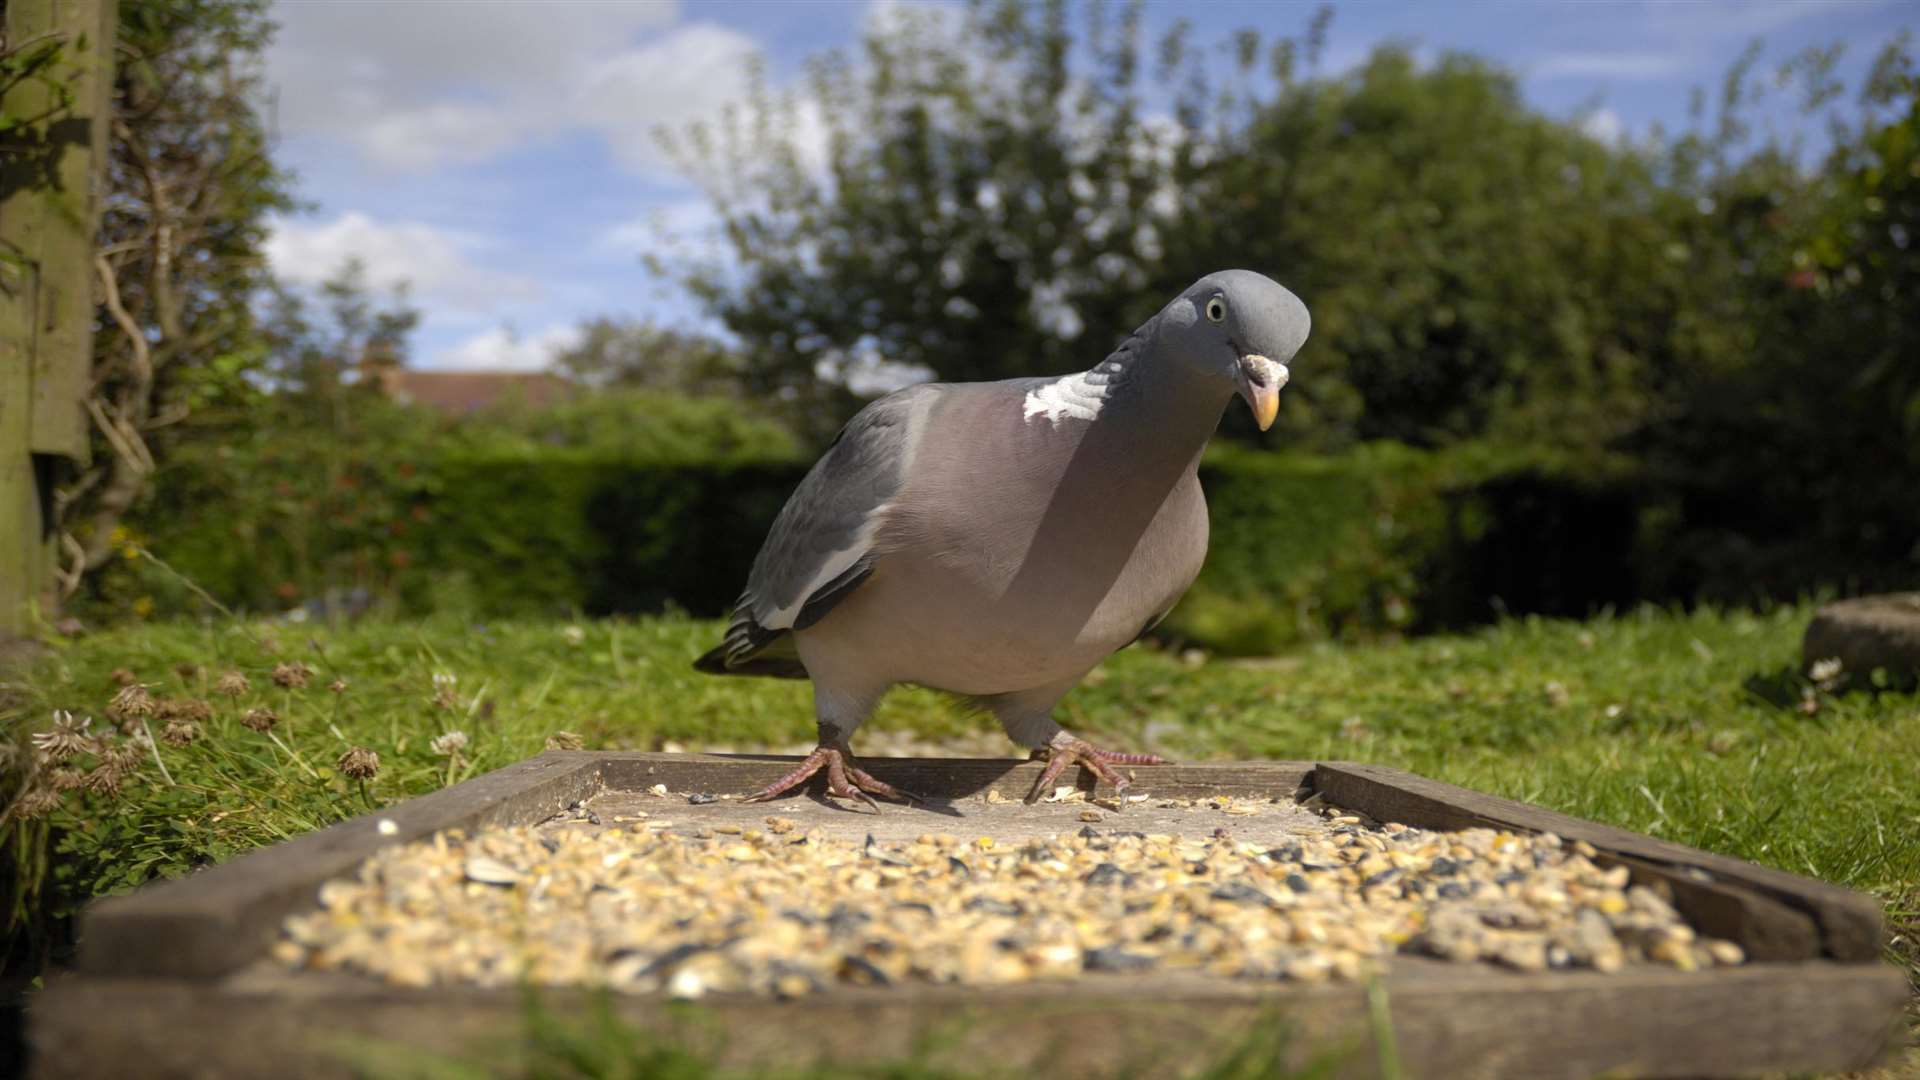 Pigeons are common visitors to Kent gardens